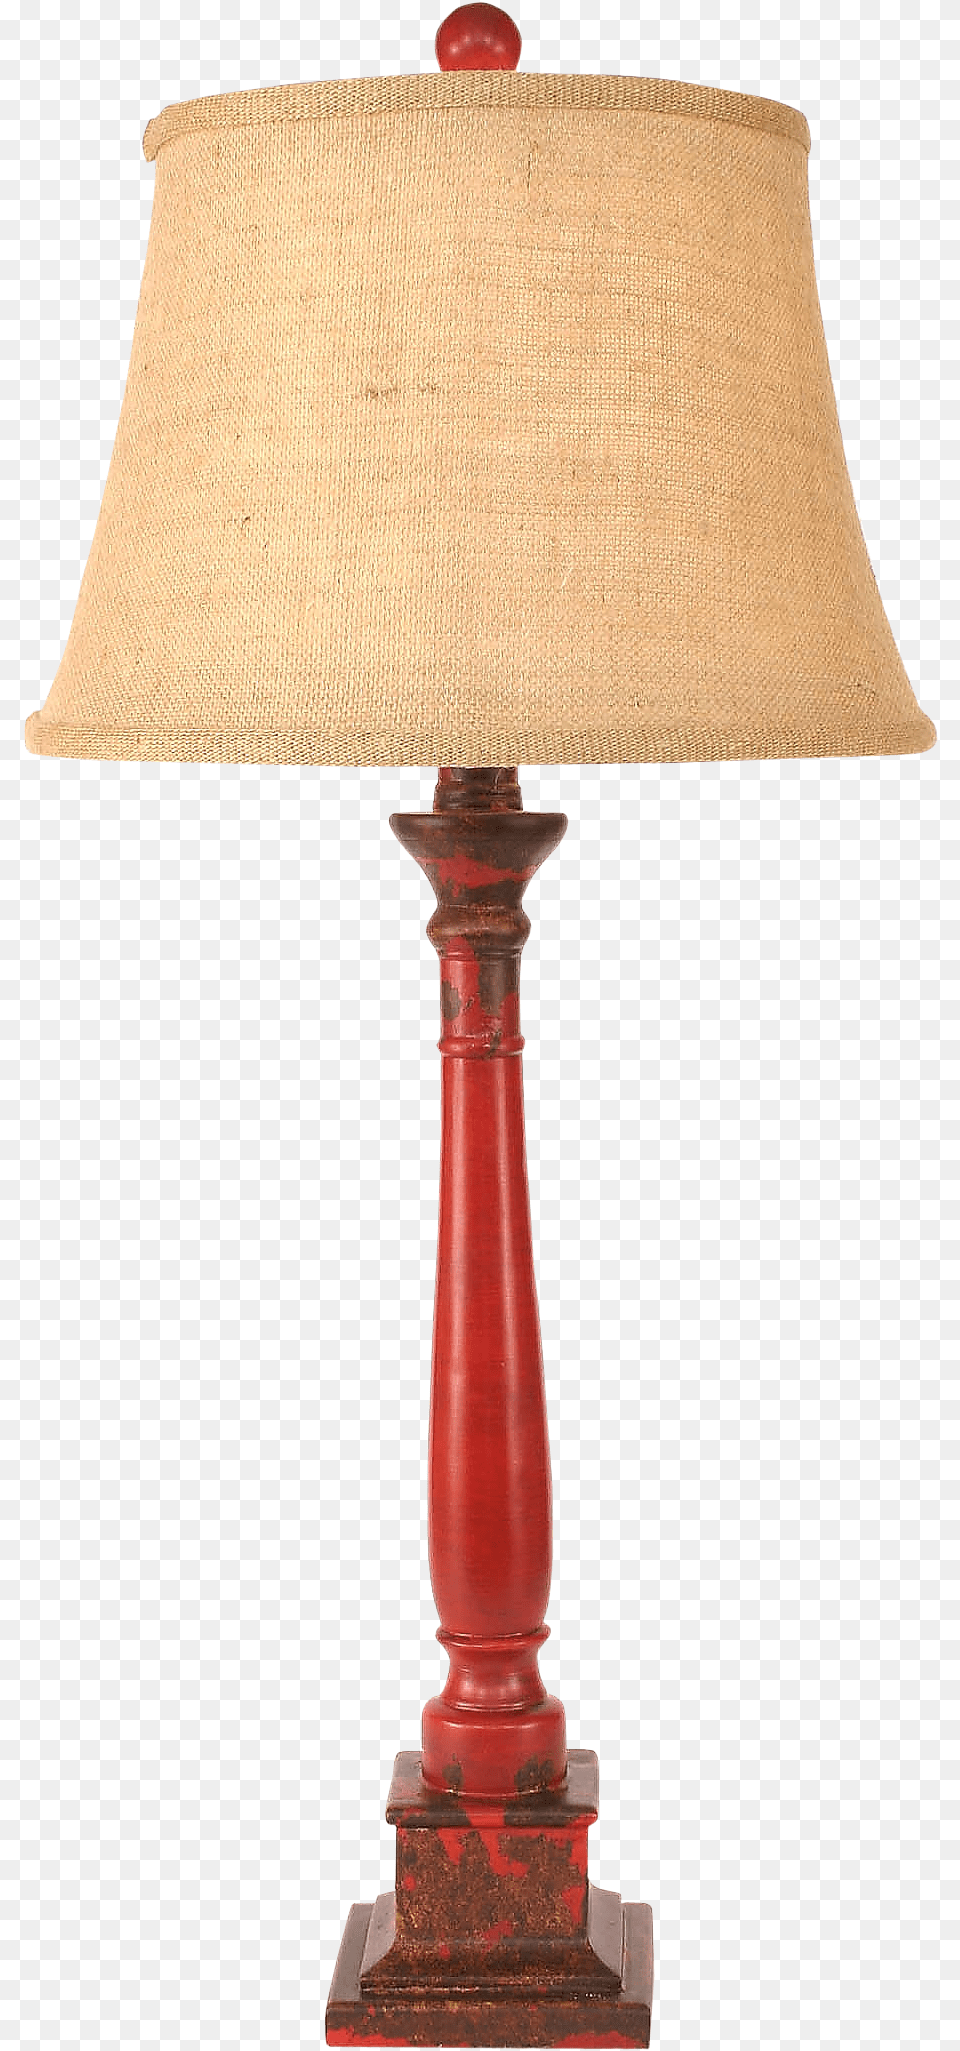 Aged Brick Red Square Candlestick Table Lamp Lamp, Lampshade, Table Lamp Png Image